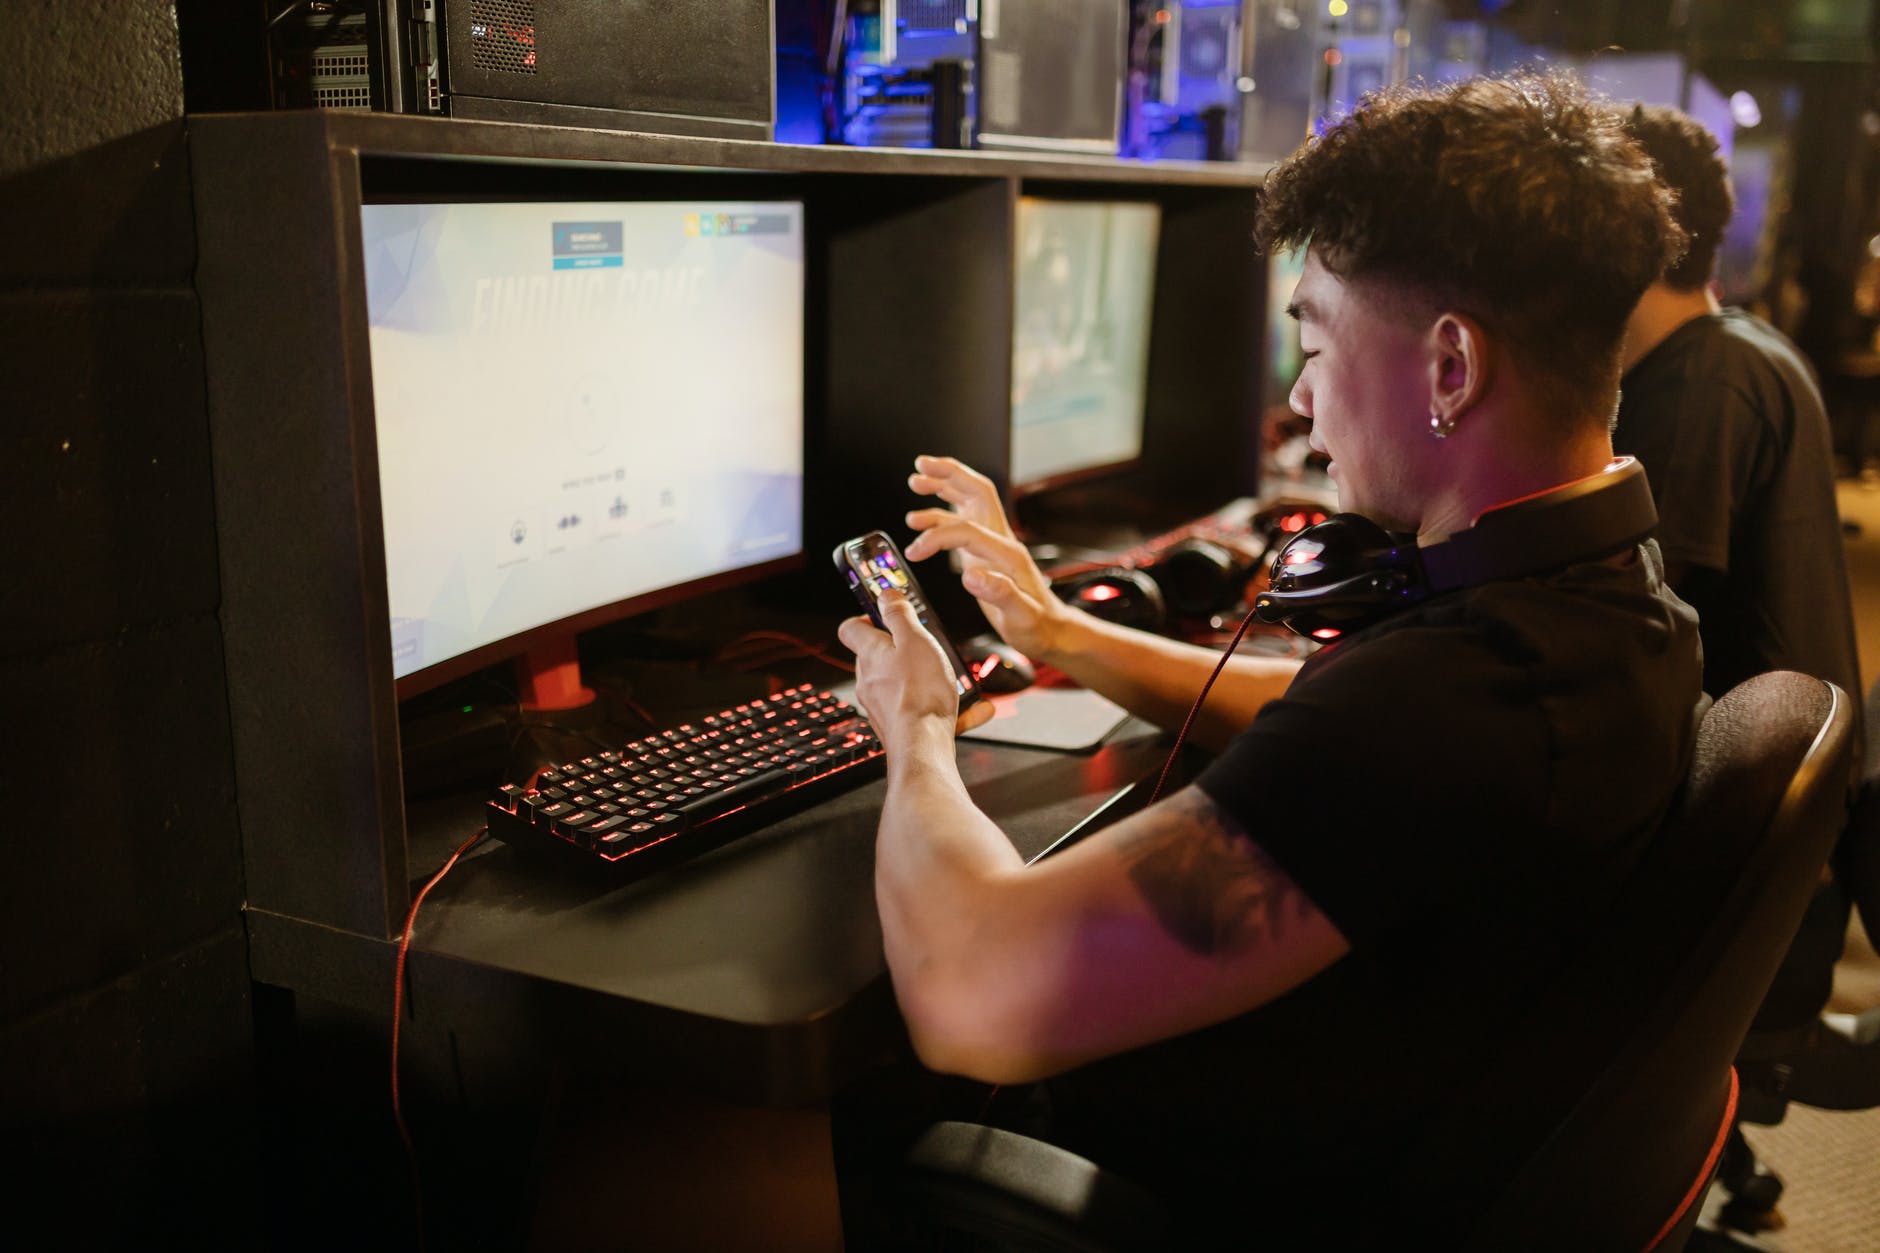 man in black shirt using a smartphone while sitting by the gaming computer